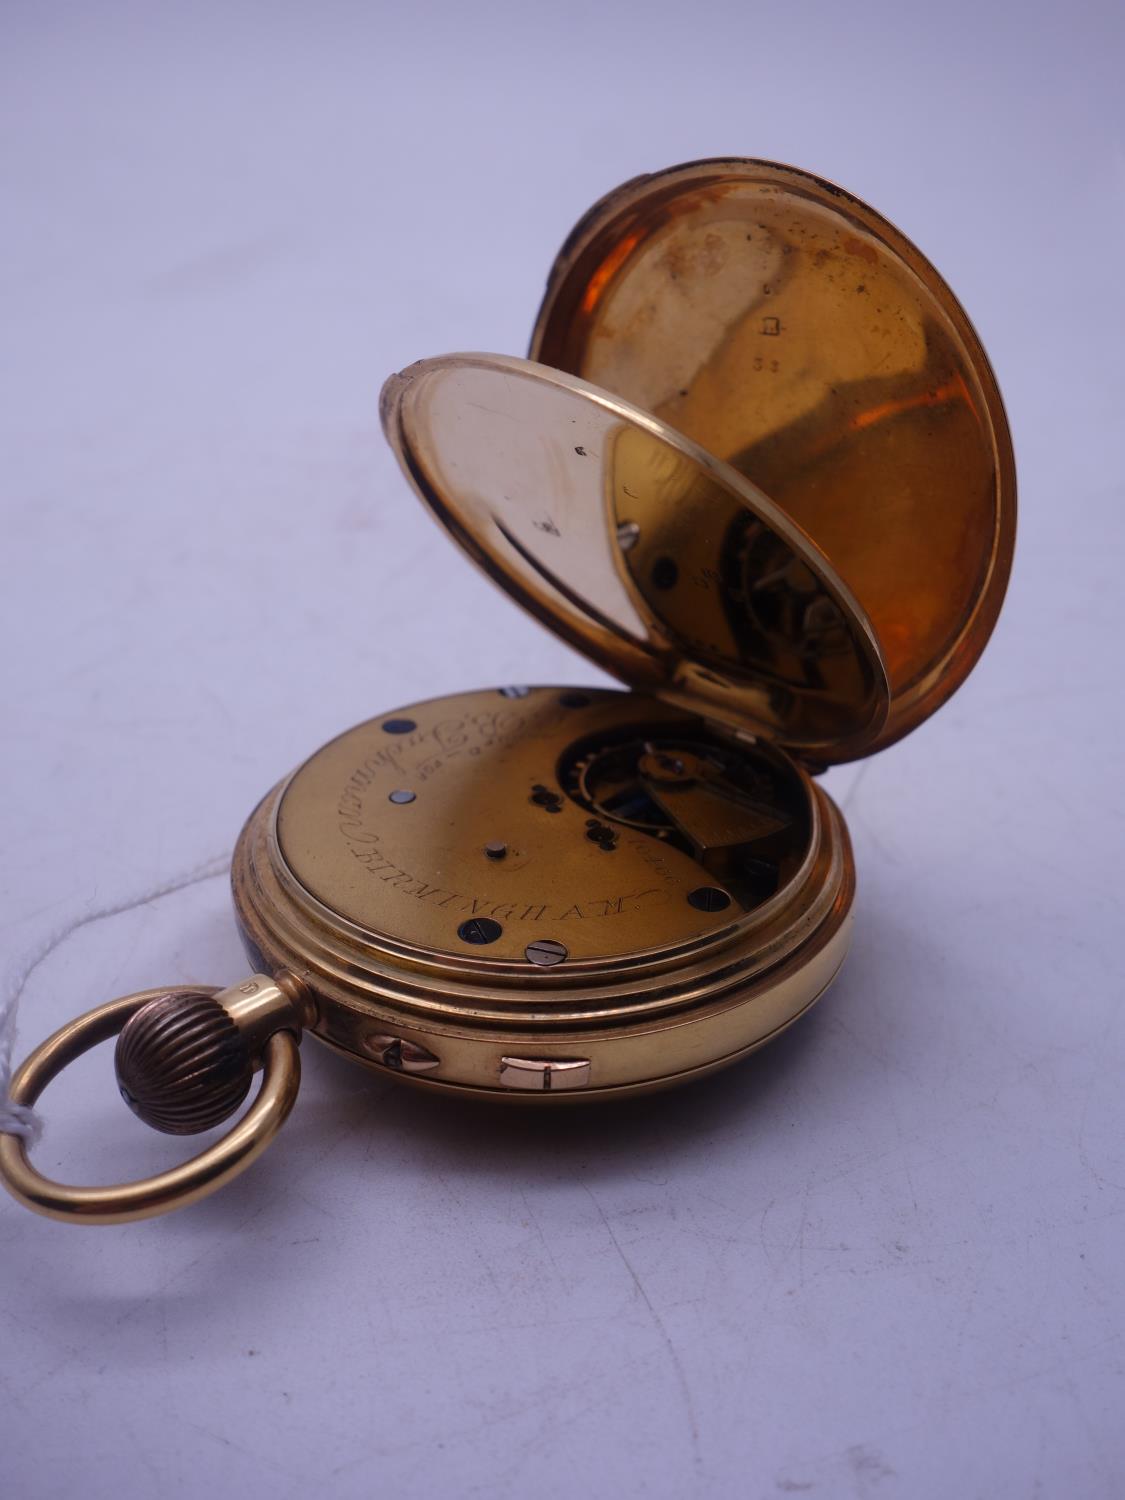 Antique 18ct gold chronometer pocket watch by LB Tuchman of Birmingham, an open face with Crown wind - Image 2 of 5